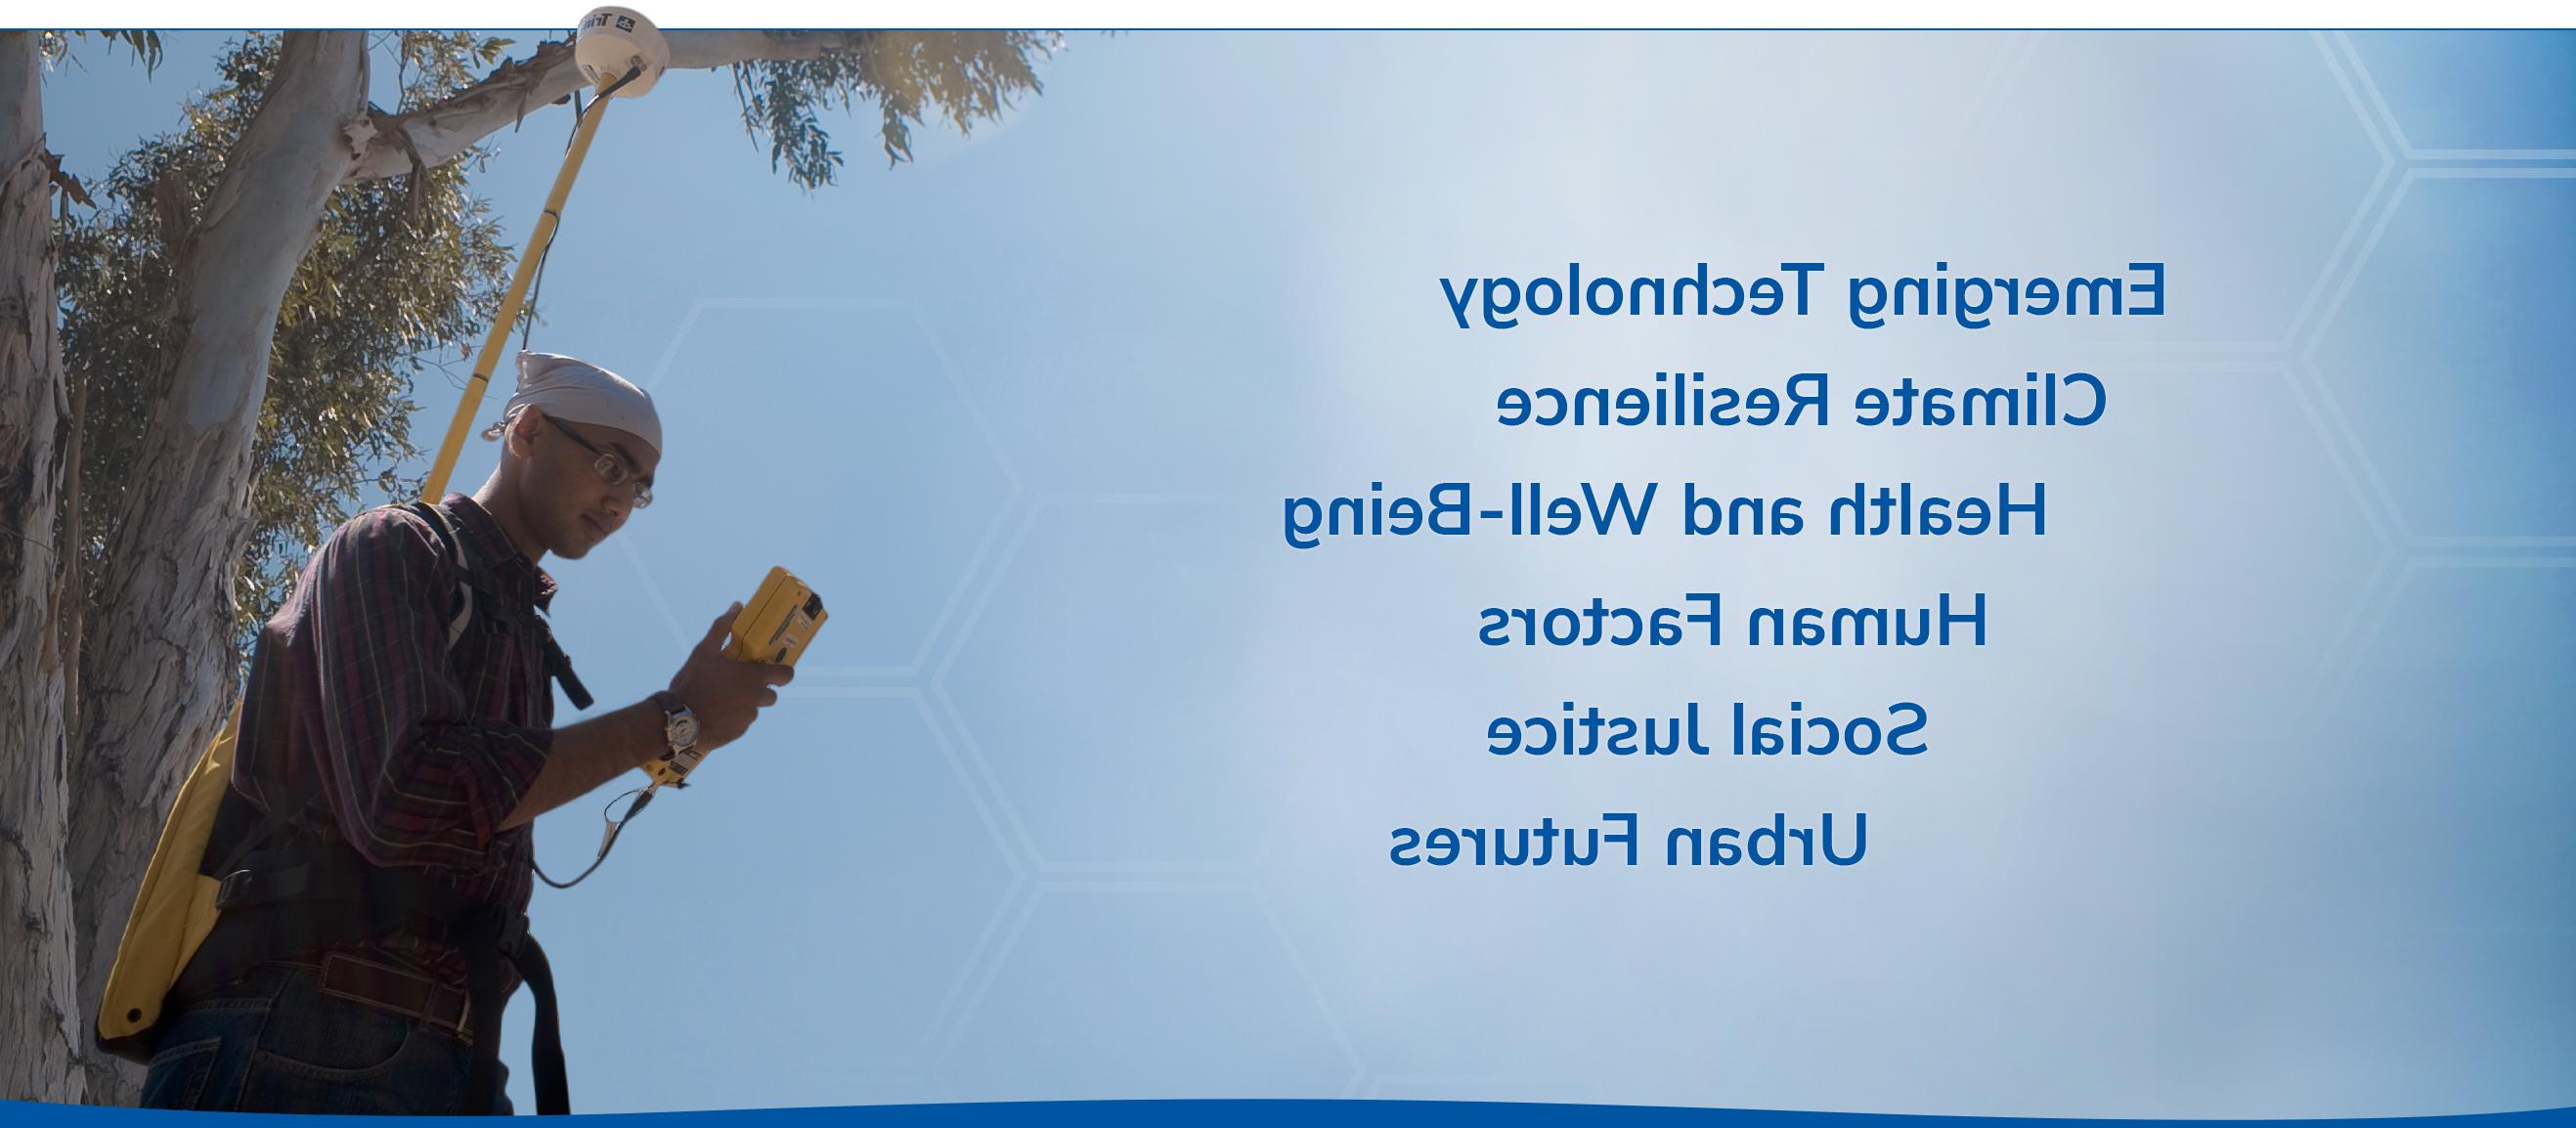 Person holds scientific survey equipment while standing in front of tree.  Text advertising the main strength categories linked below: Emerging Technology, 气候适应能力, Health and Well-Being, 人为因素, 社会正义, 城市未来